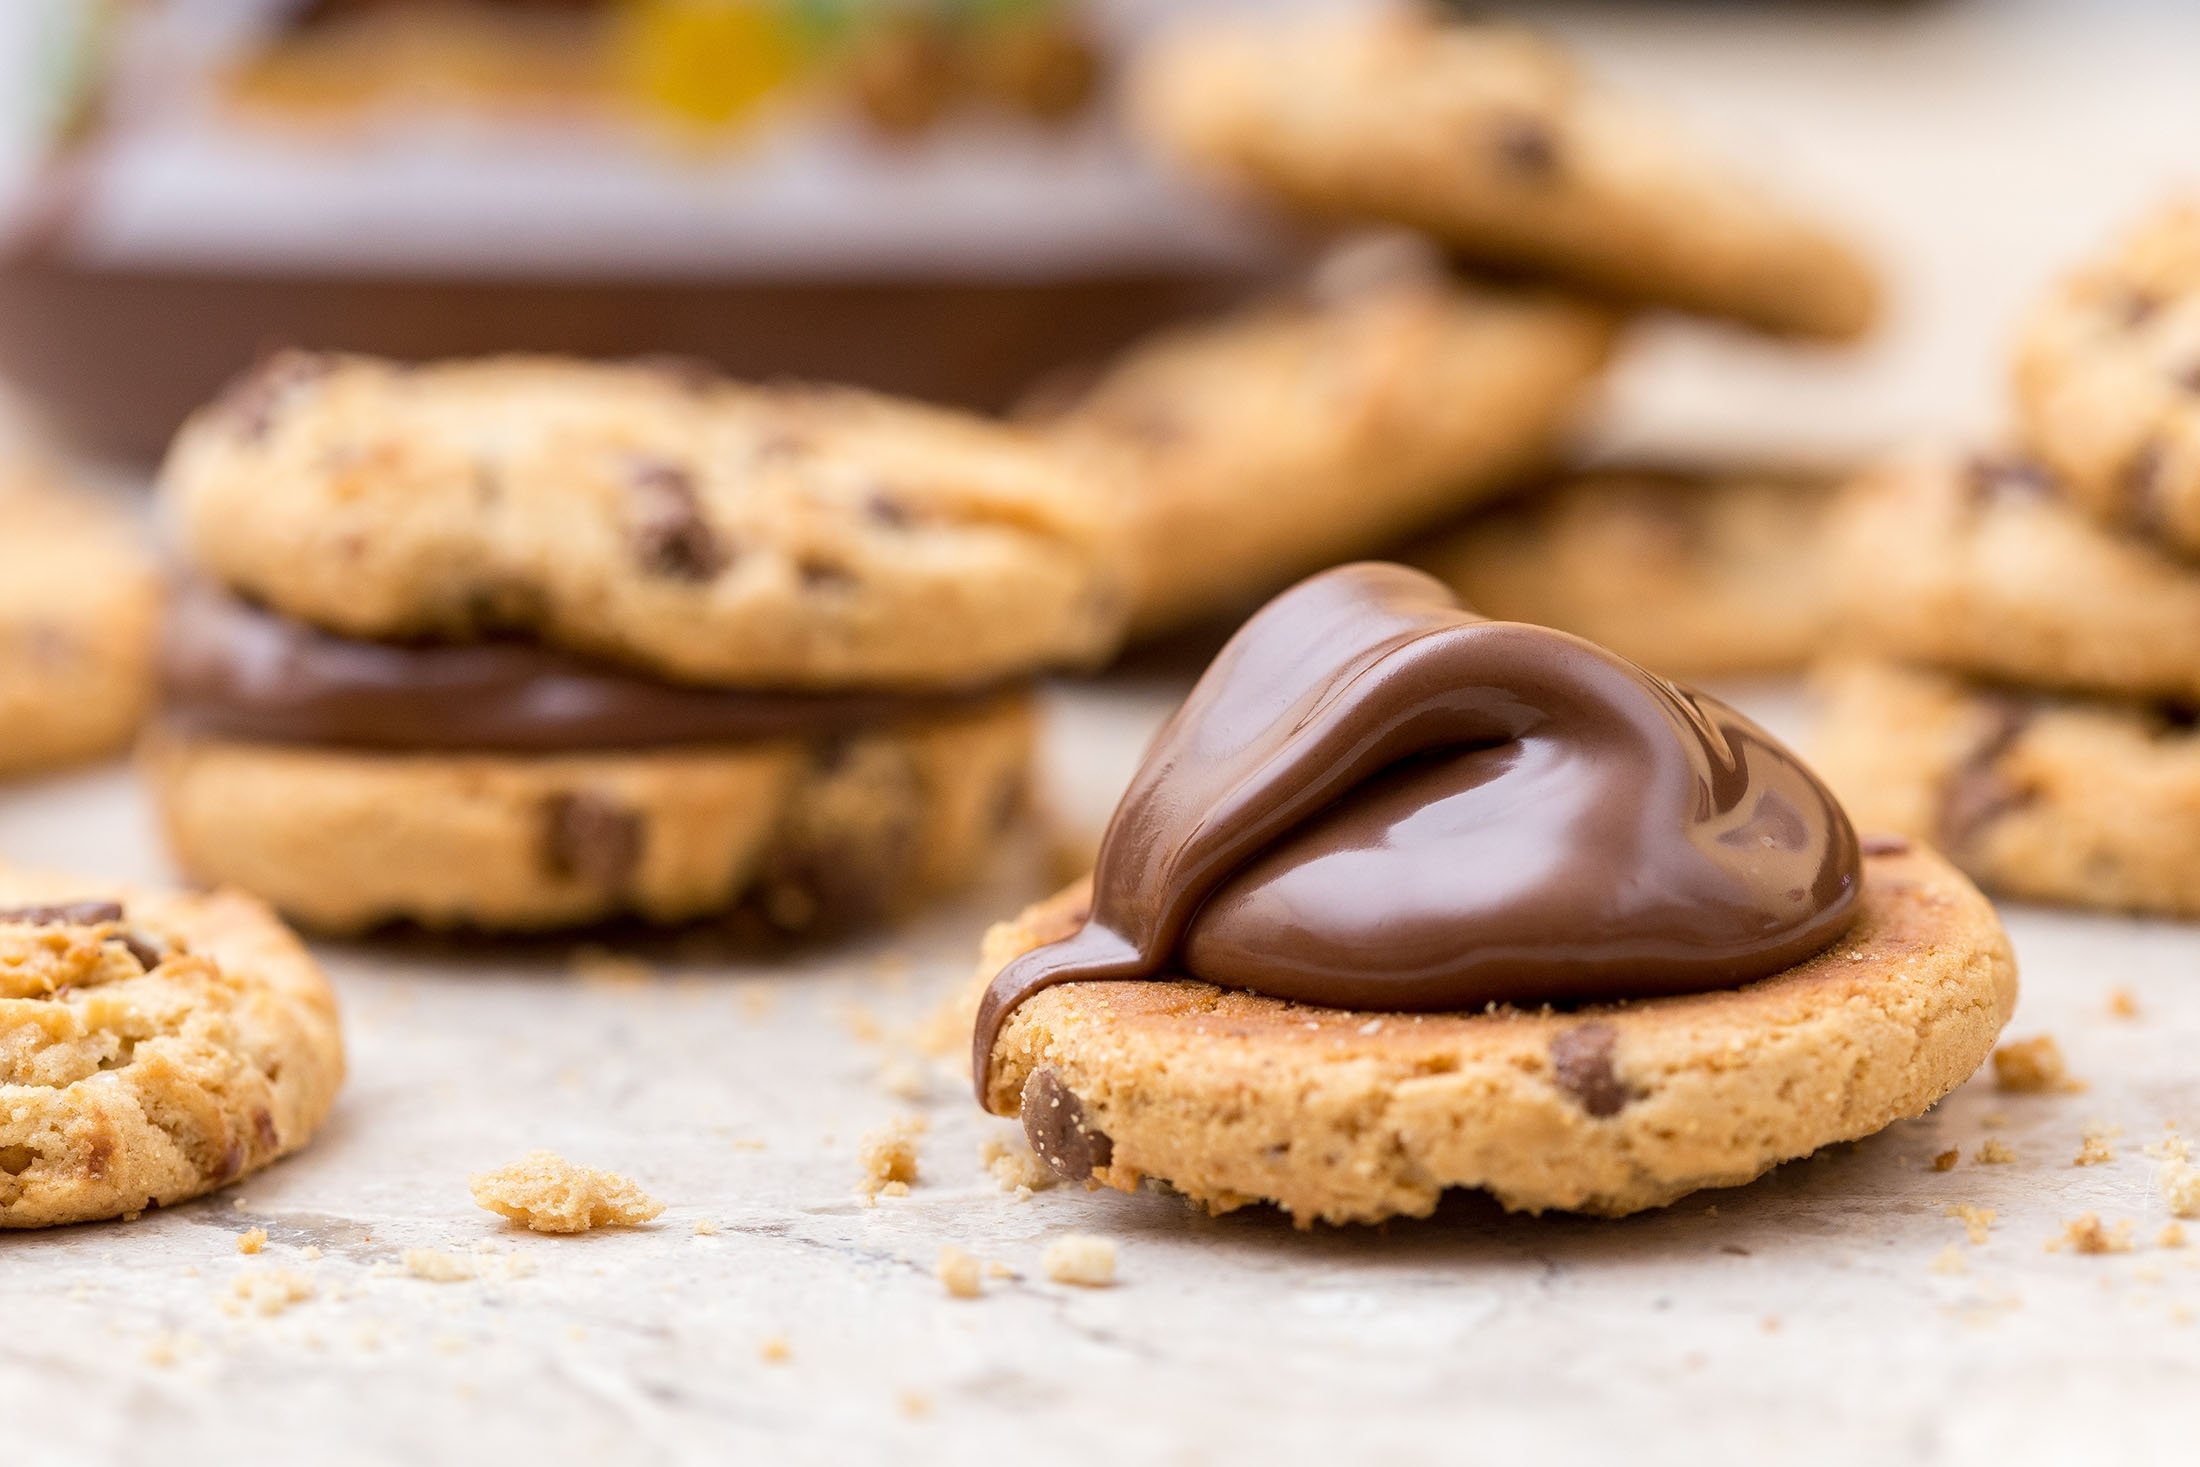 Nutella chocolate on cookies is a great choice. (Shutterstock Photo)